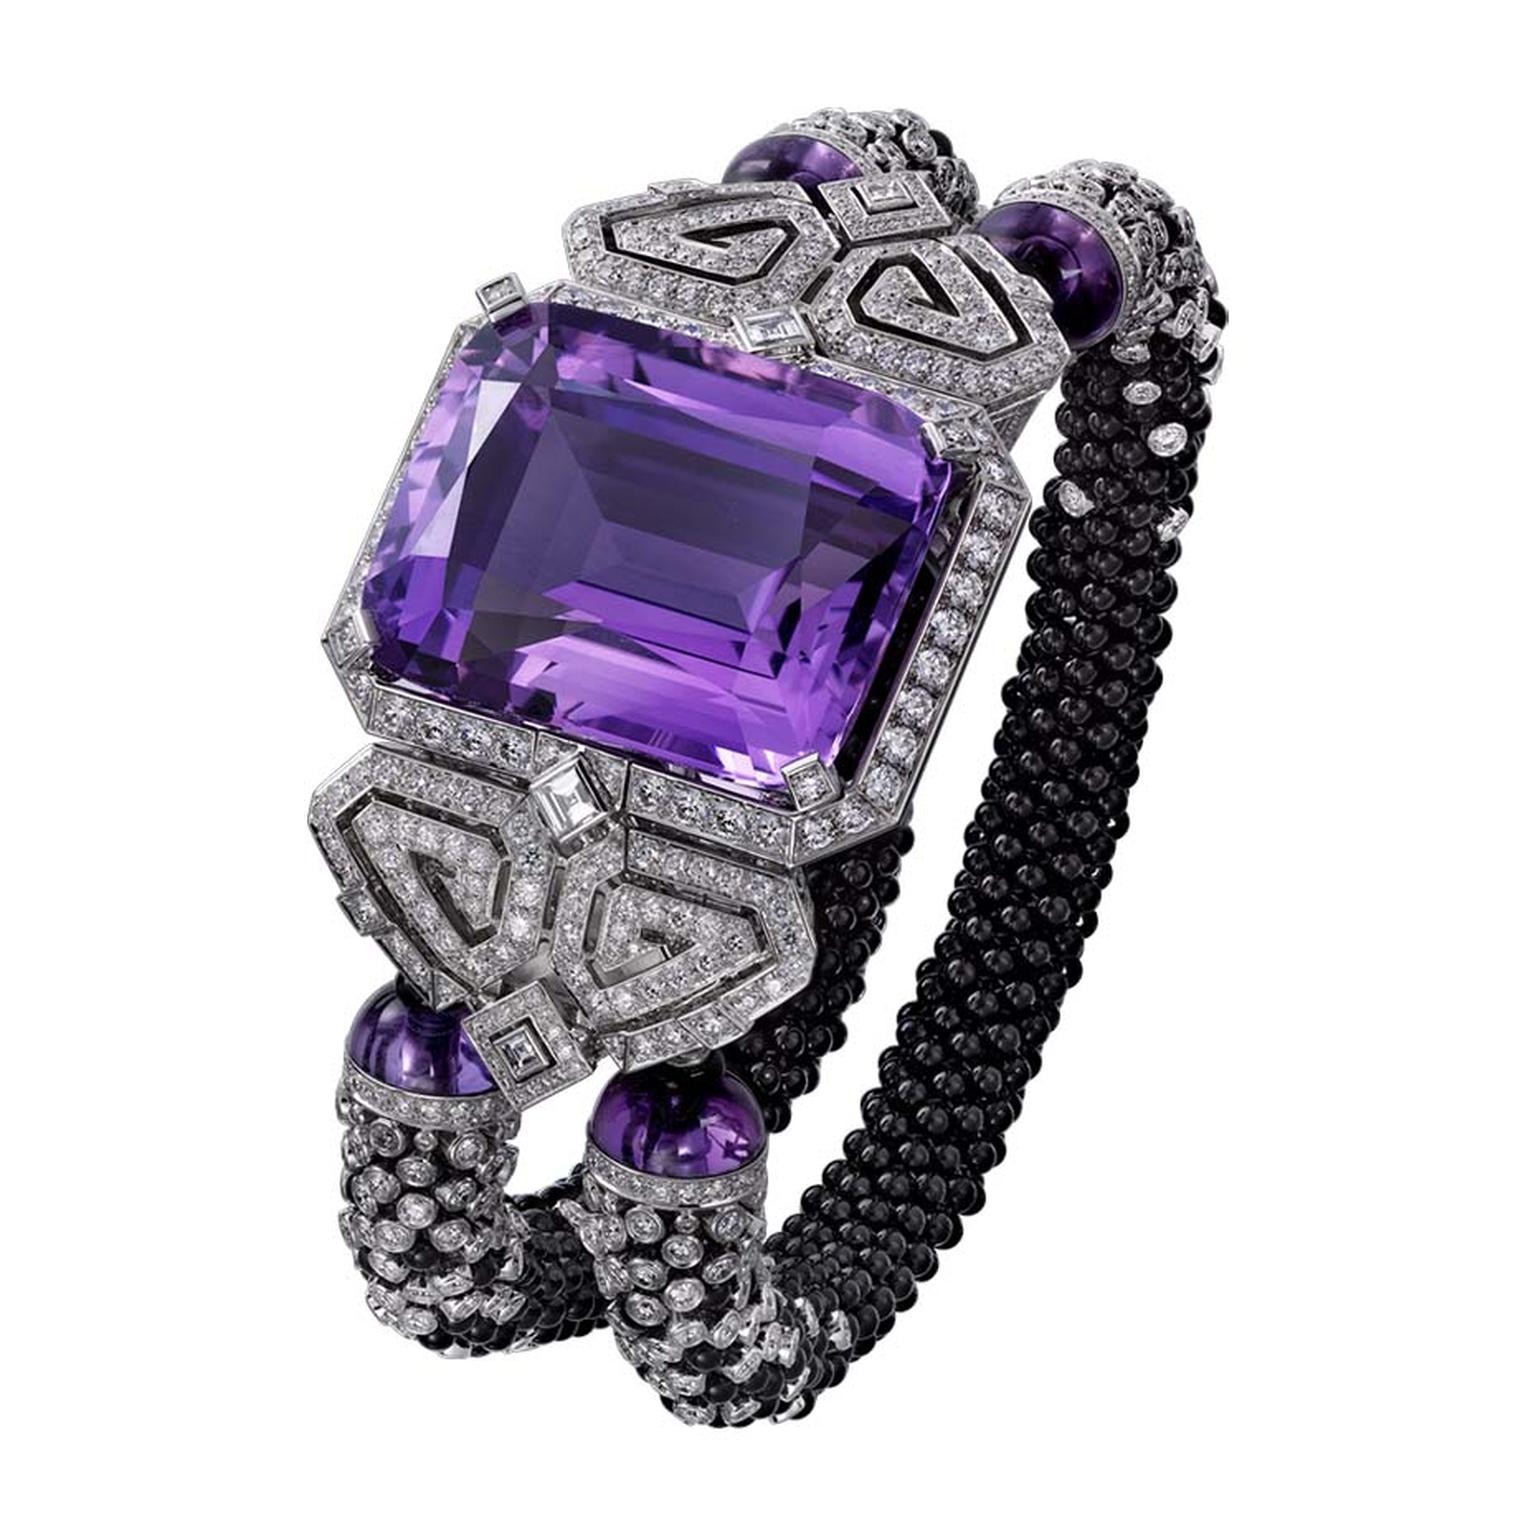 Cartier Purple high jewellery secret watch has two curved scrolls set with onyx and diamonds, which sustain the two diamond and onyx beaded bracelets.